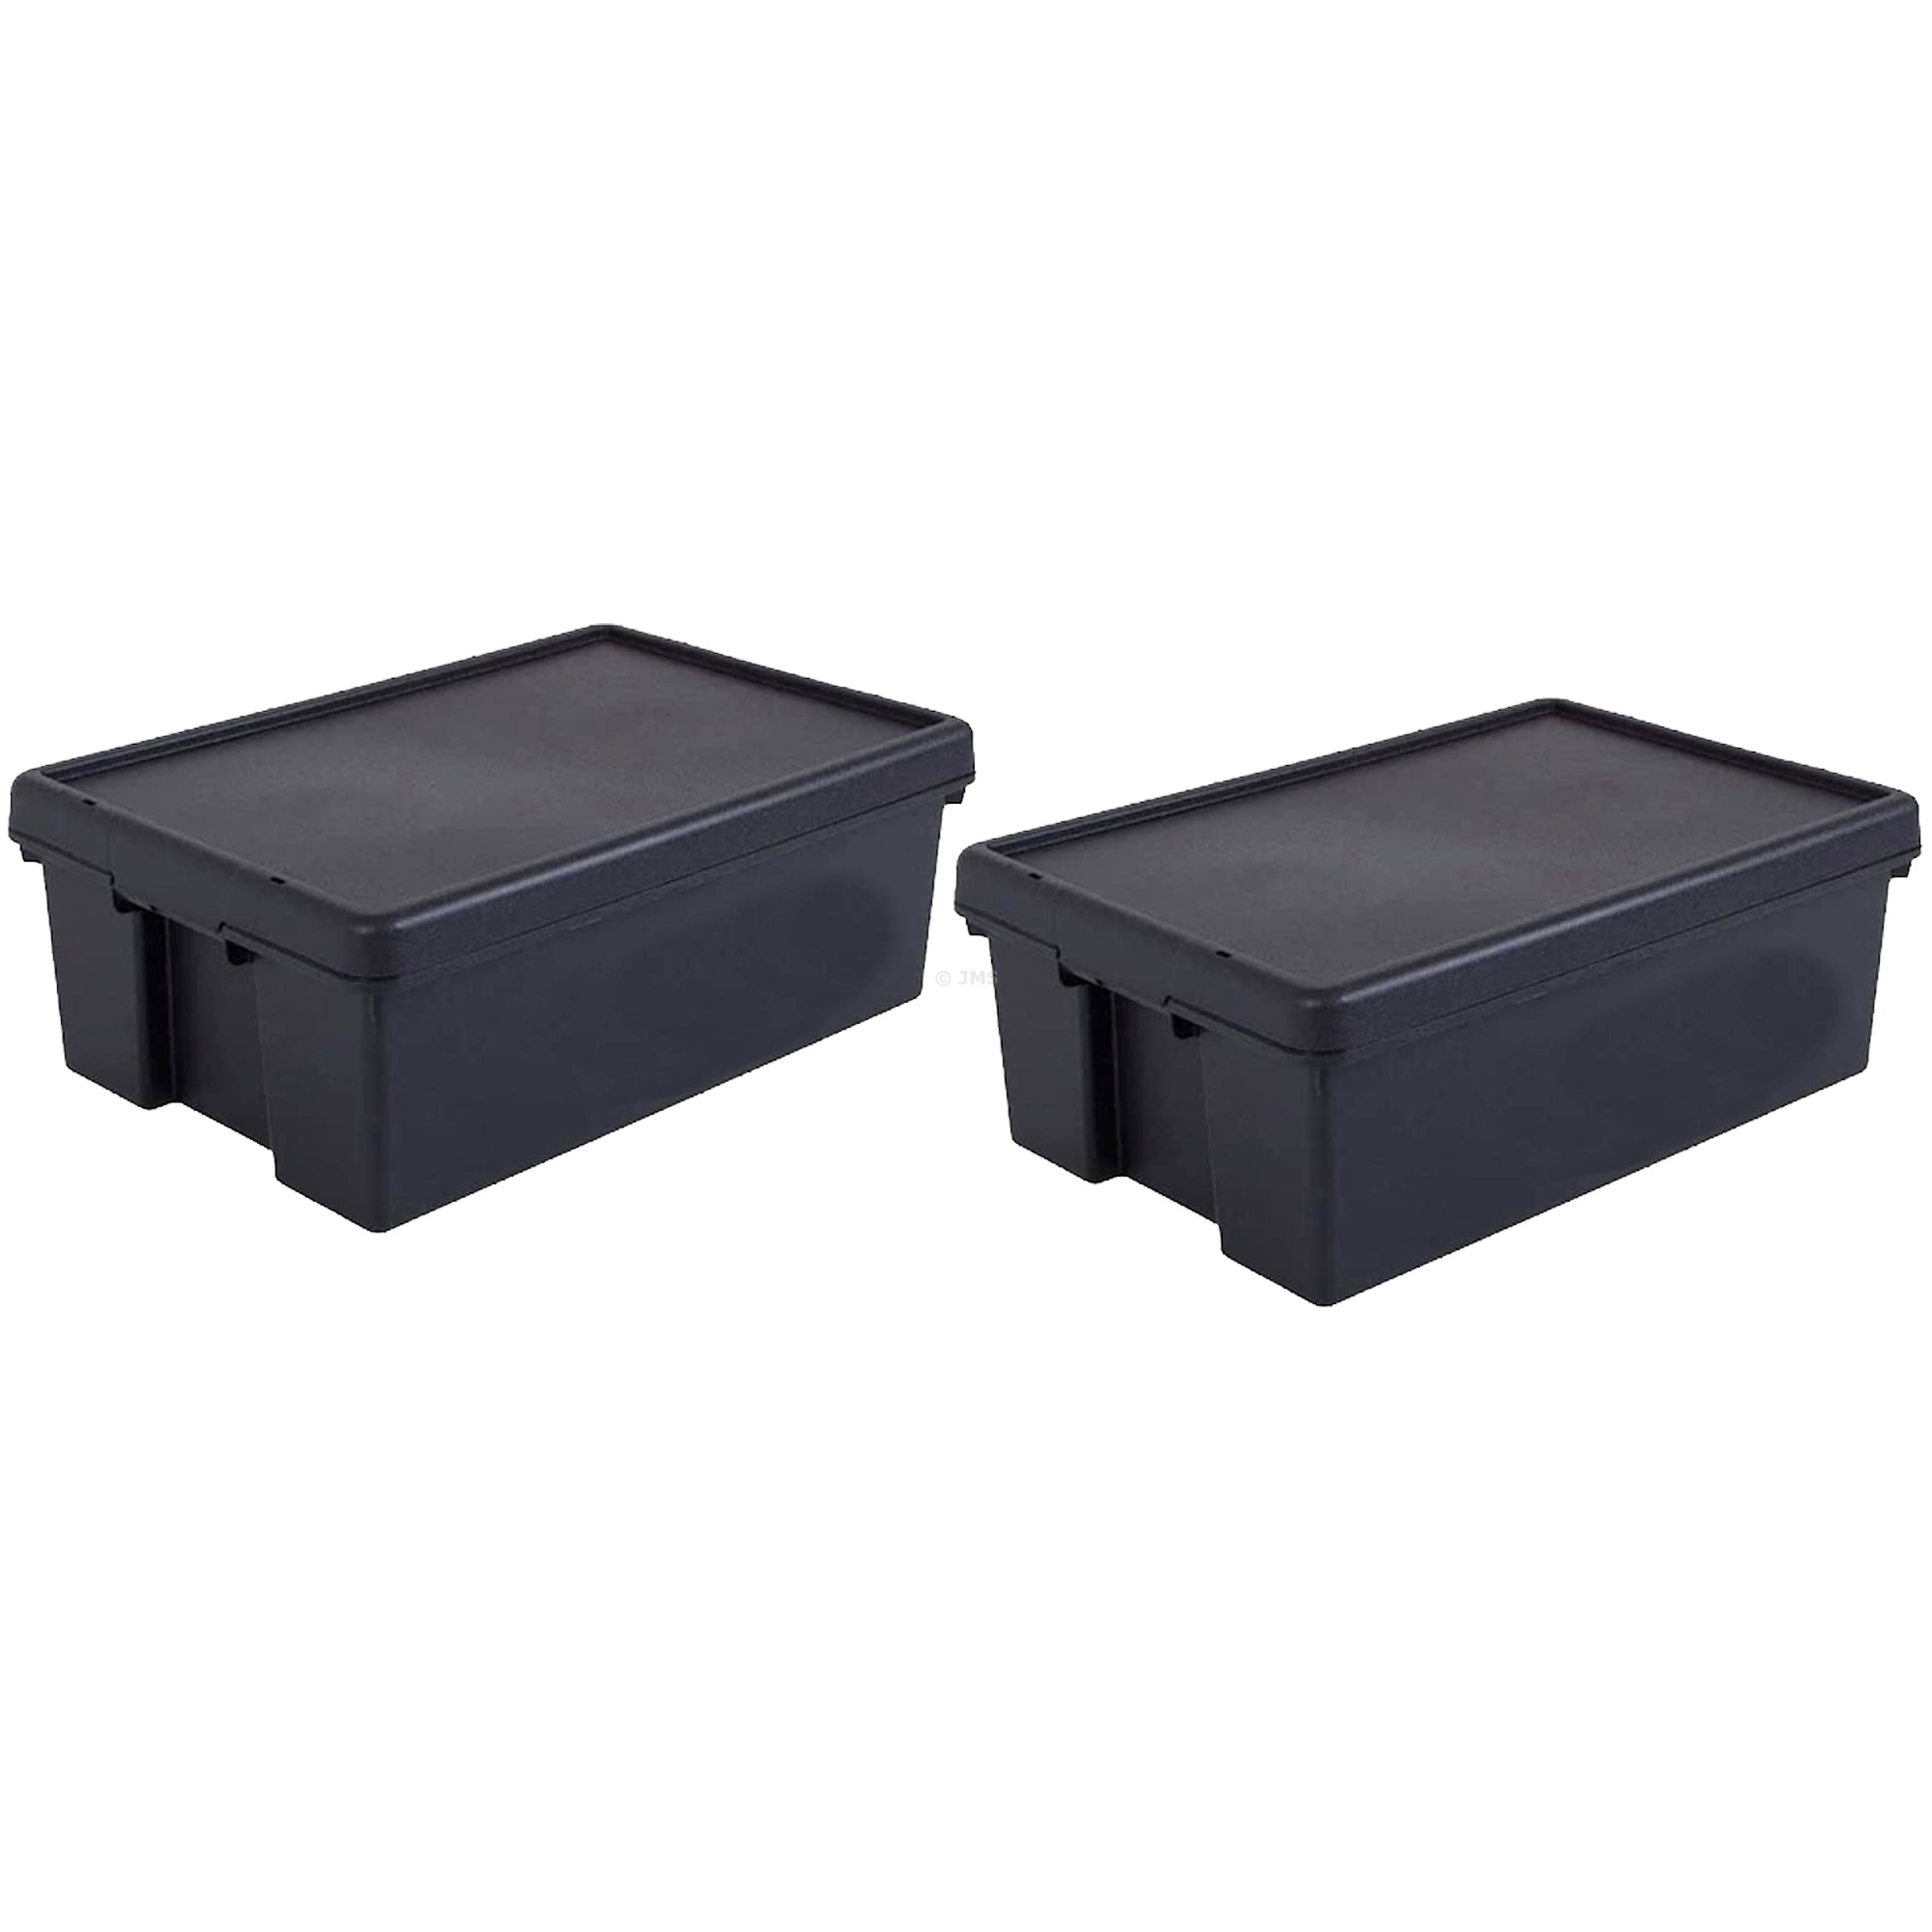 [Set of 2] 36L Heavy Duty Black Storage Box with Lid Recycled Plastic Stackable Nestable Containers Home Office Garage Toolbox